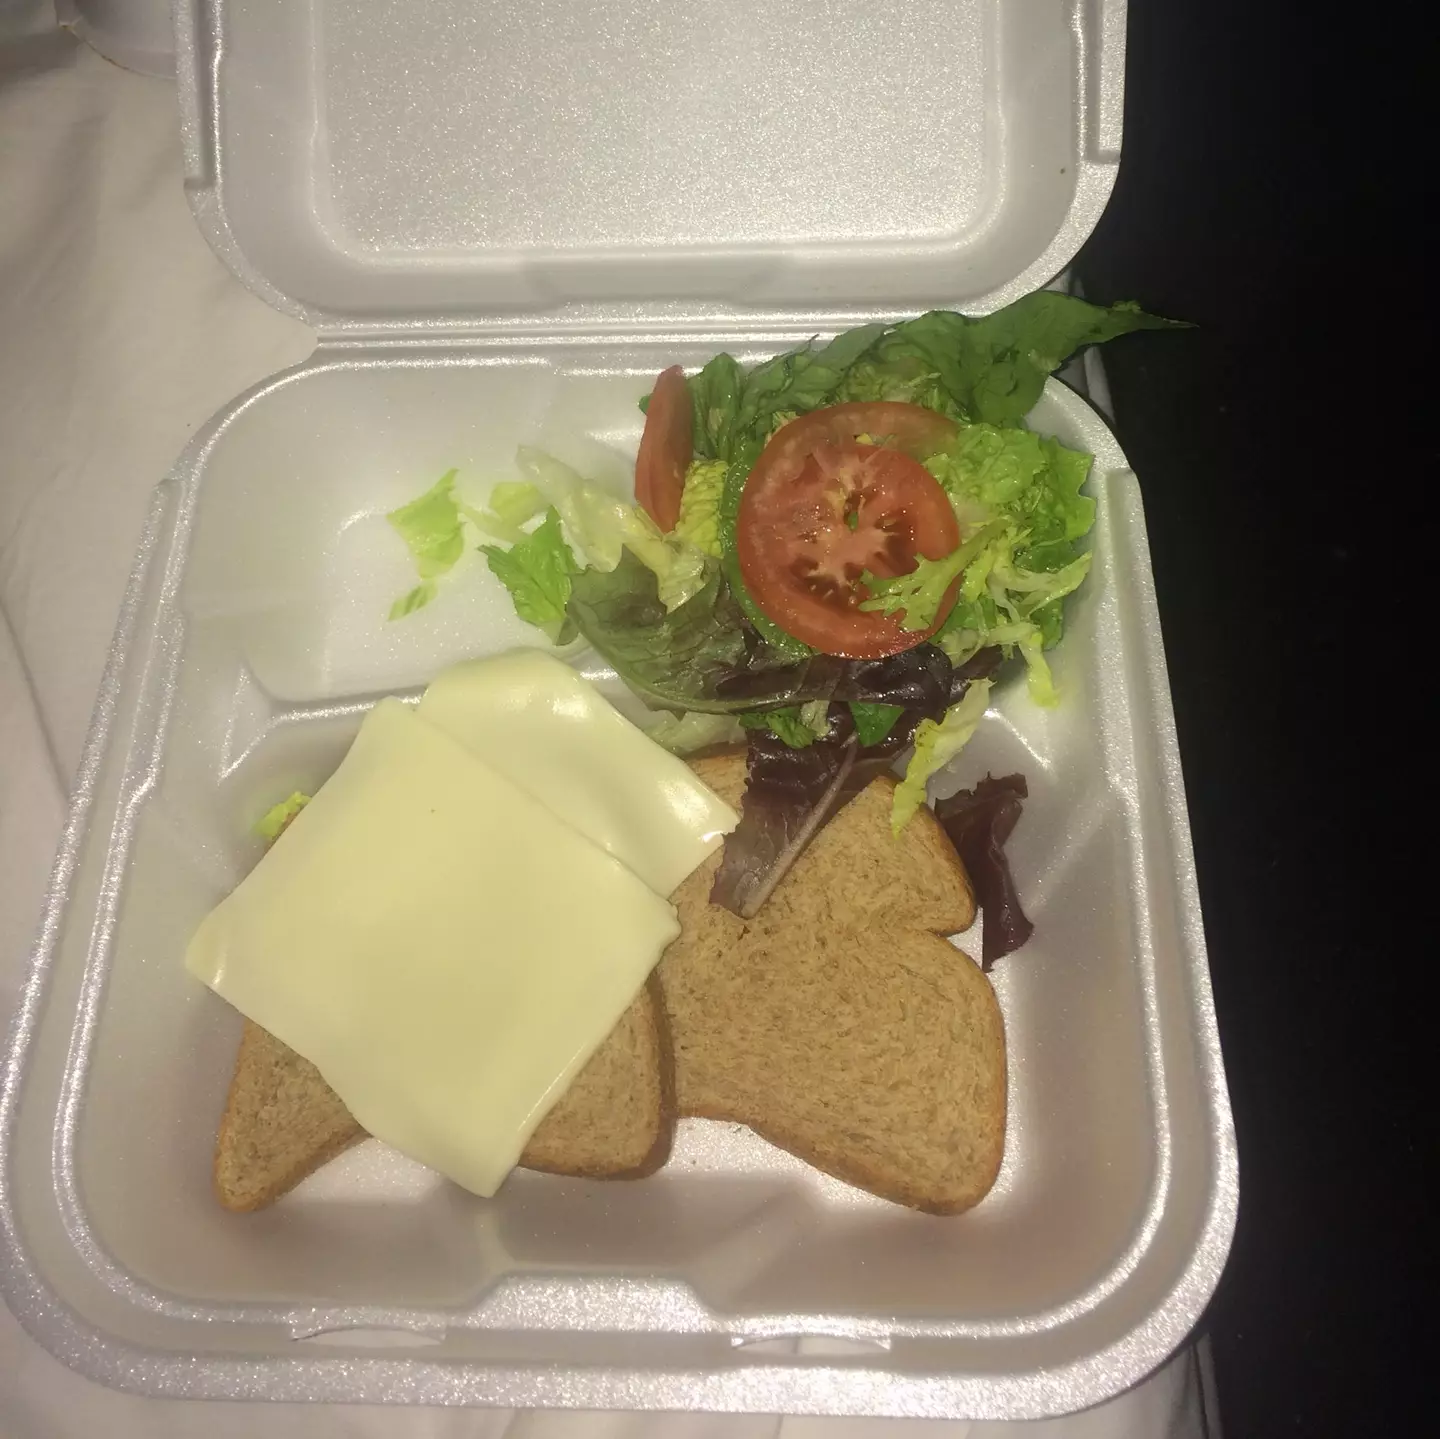 The food resembles that of Fyre Fest (pictured).